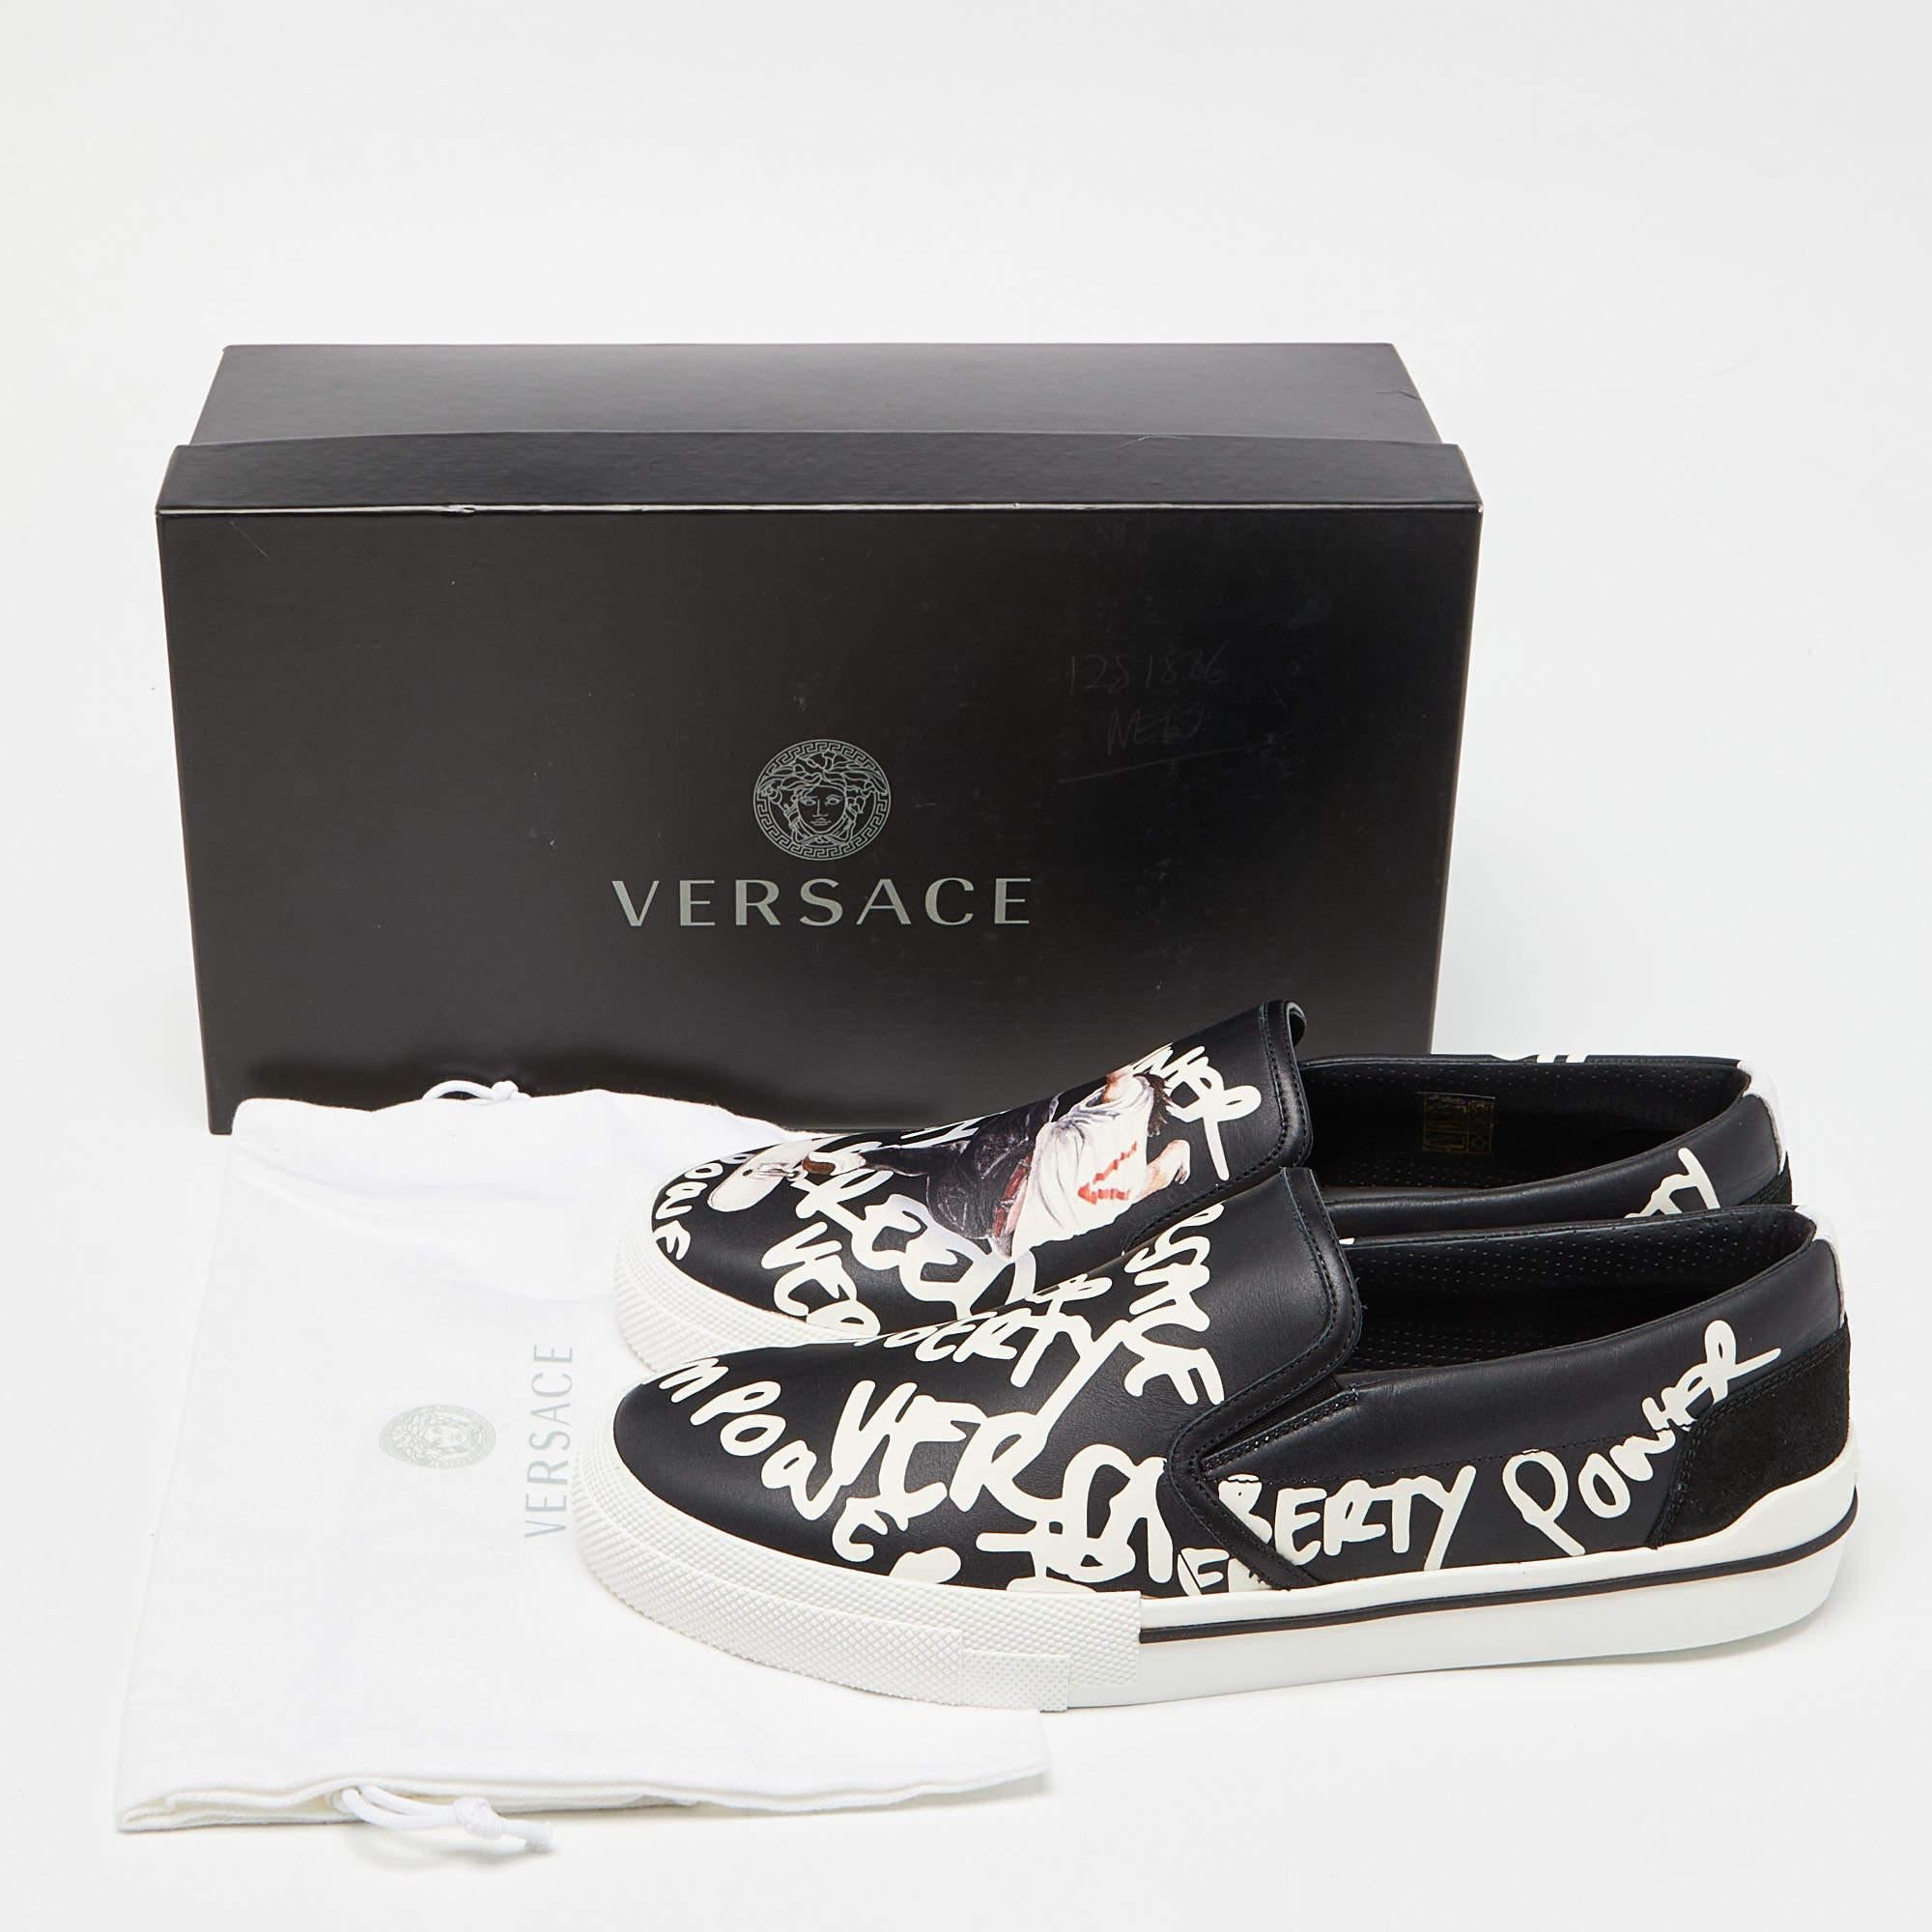 Versace Black/White Printed Leather Slip On Sneakers Size 43 5